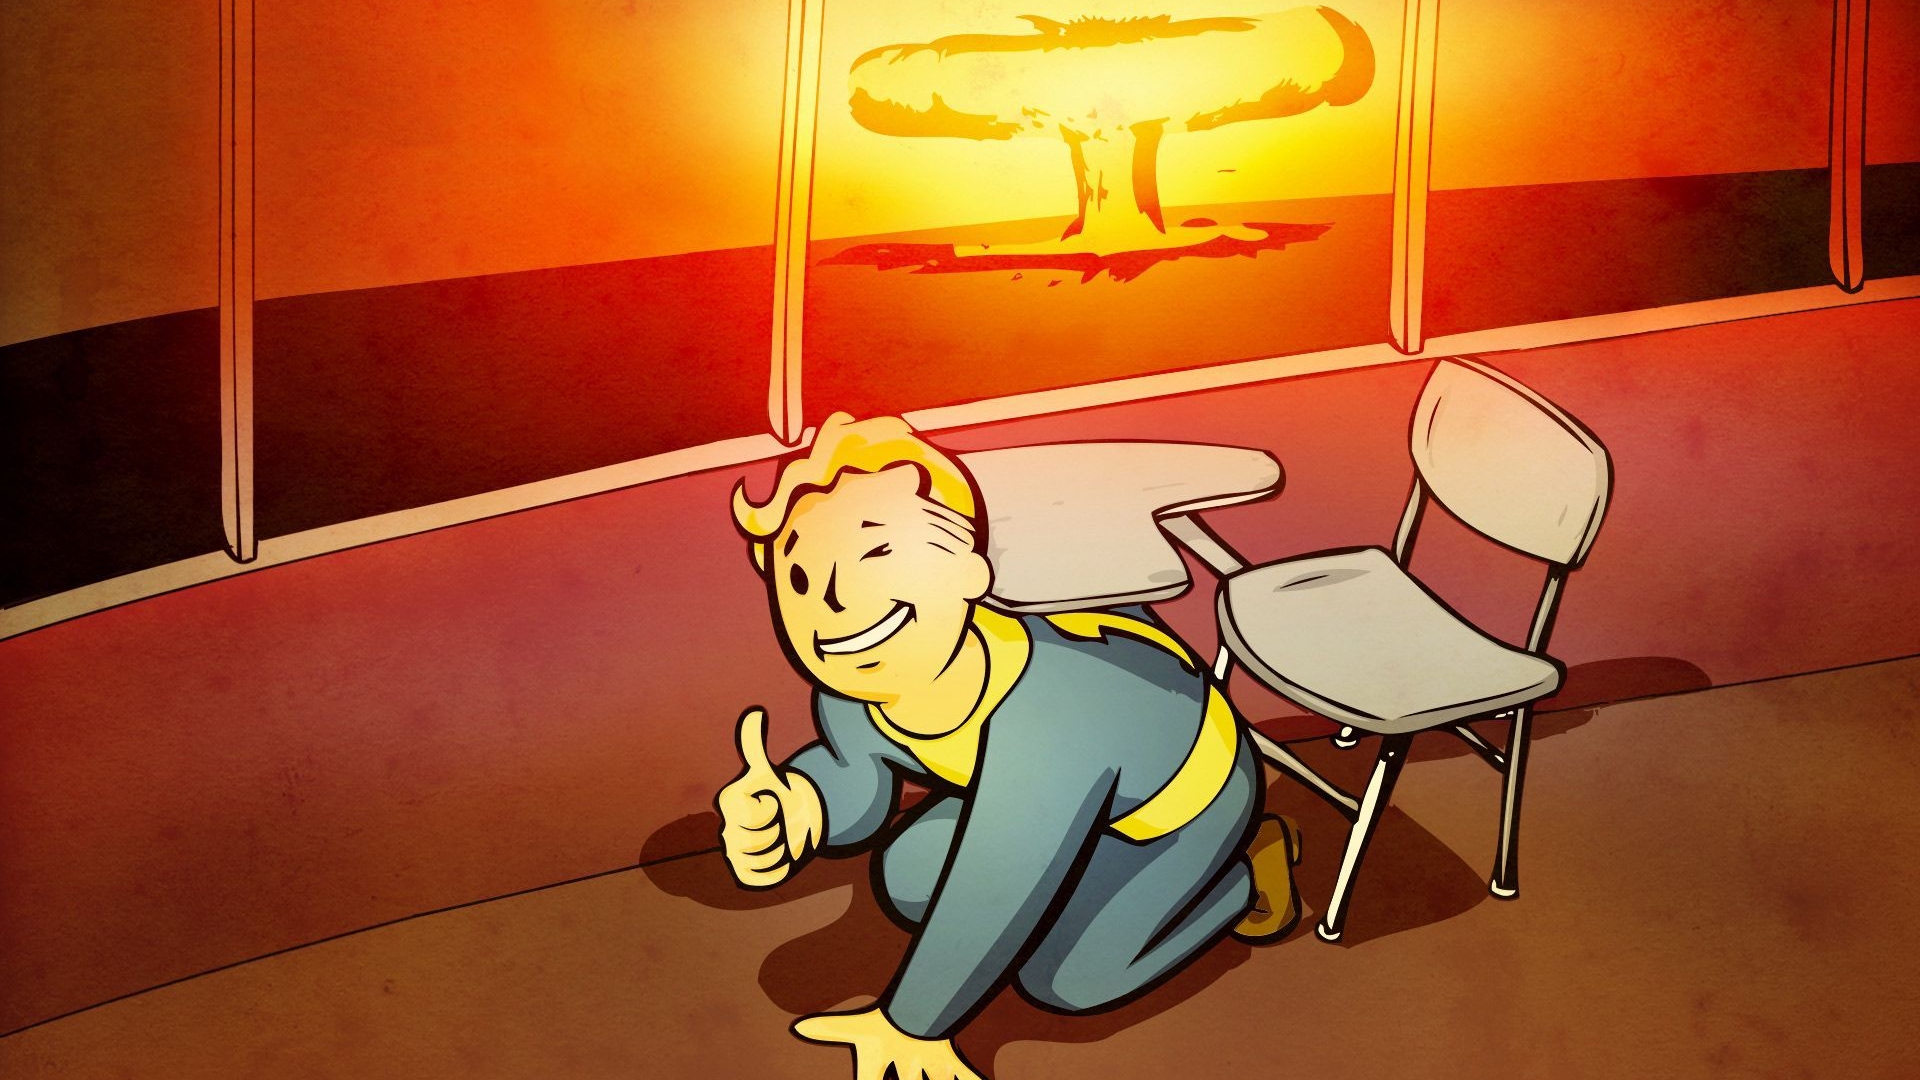  Bethesda beefing it with a calamitous 'next-gen' Fallout 4 update just as everyone's falling in love with Fallout again is the most Bethesda thing imaginable 